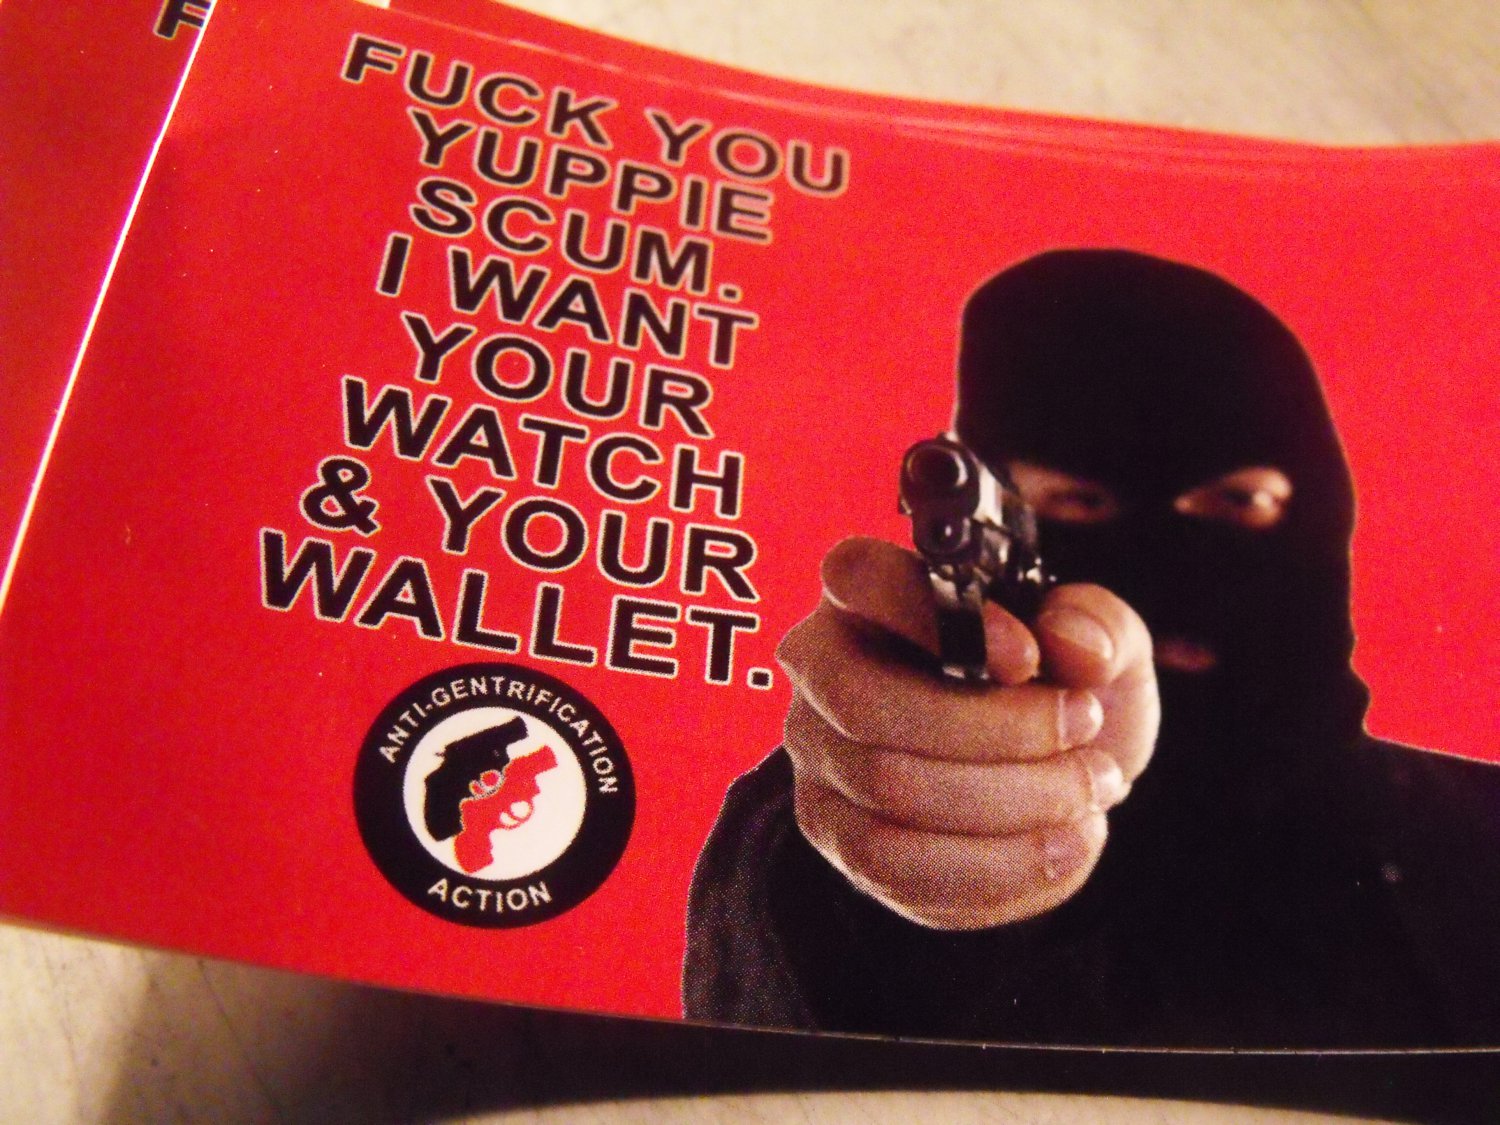 100  FUCK YOU YUPPIE SCUM.  I WANT YOUR WATCH & YOUR WALLET.  3.5" x 2.25"  stickers